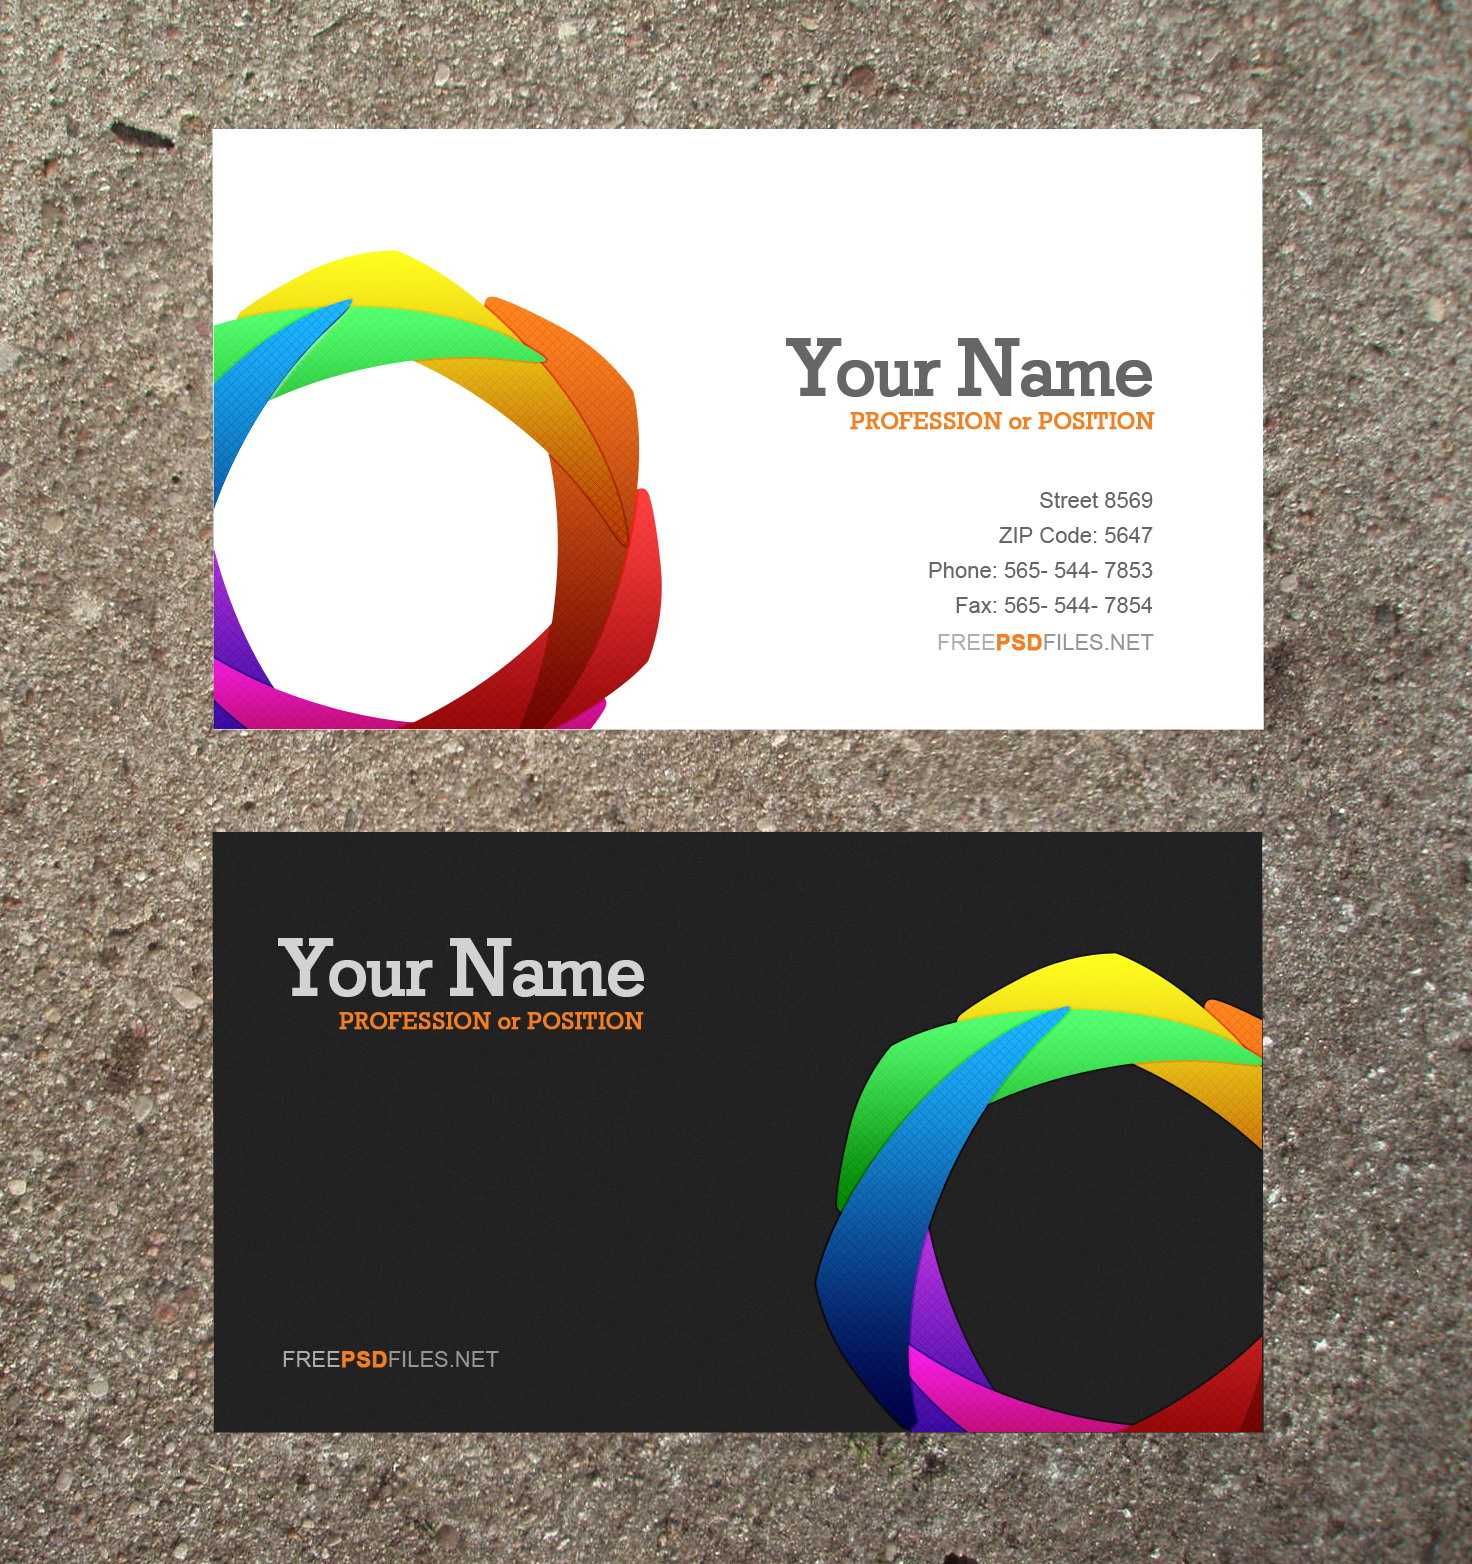 16 Business Card Templates Images – Free Business Card Intended For Free Business Cards Templates For Word